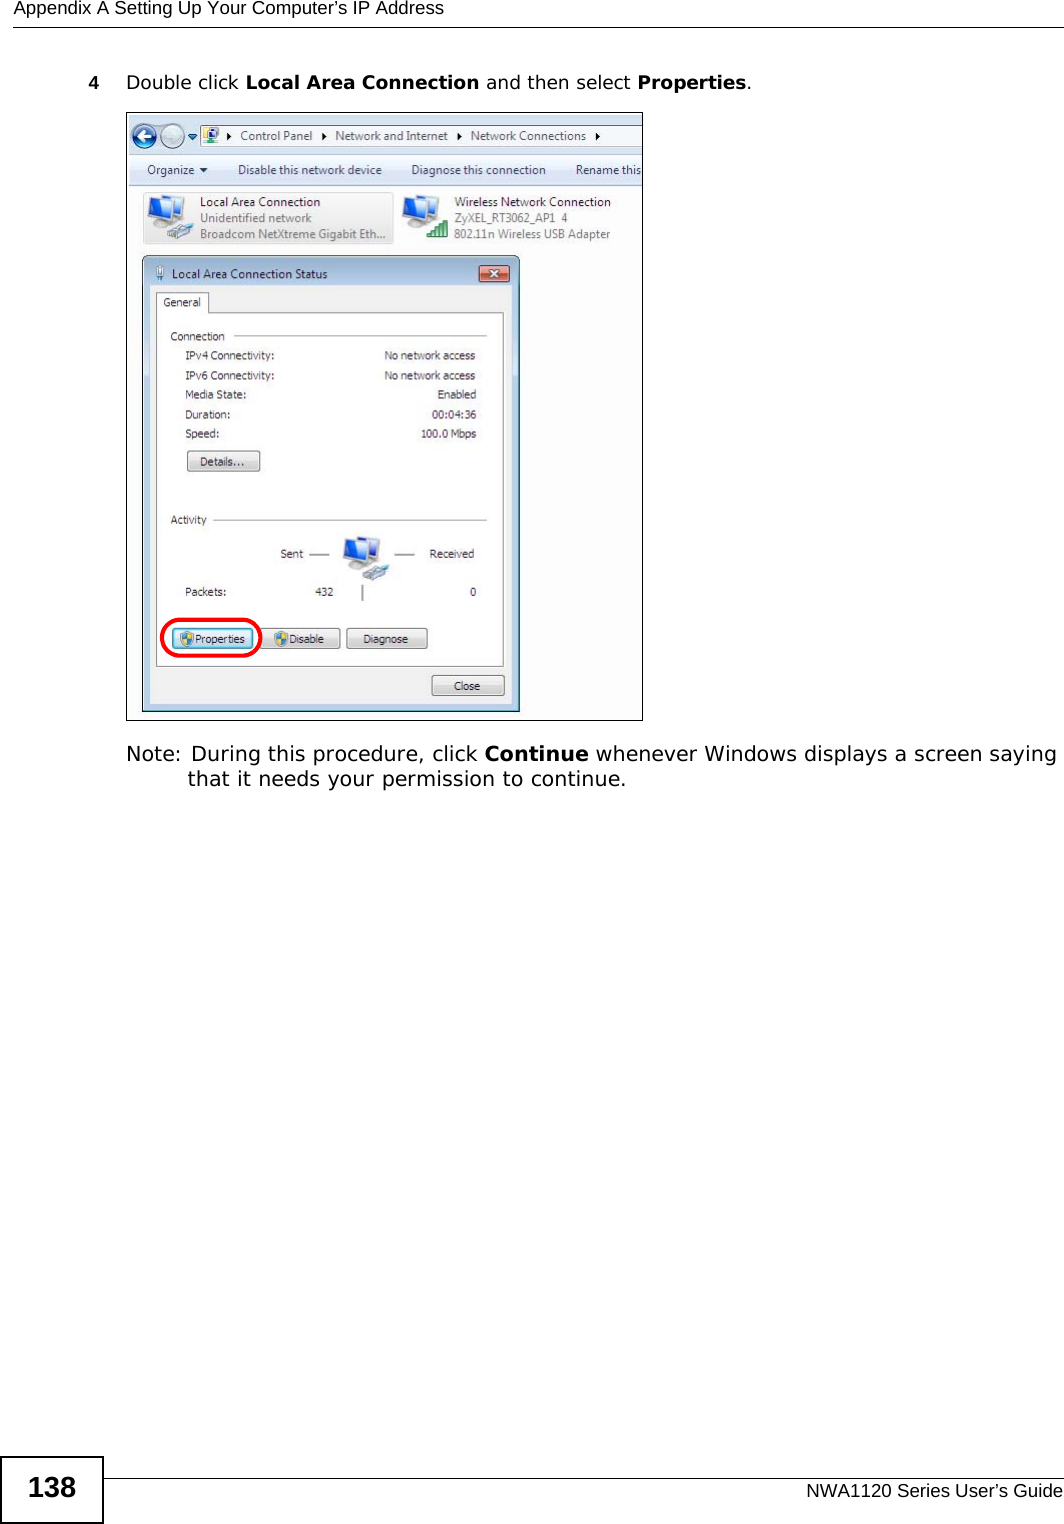 Appendix A Setting Up Your Computer’s IP AddressNWA1120 Series User’s Guide1384Double click Local Area Connection and then select Properties.Note: During this procedure, click Continue whenever Windows displays a screen saying that it needs your permission to continue.